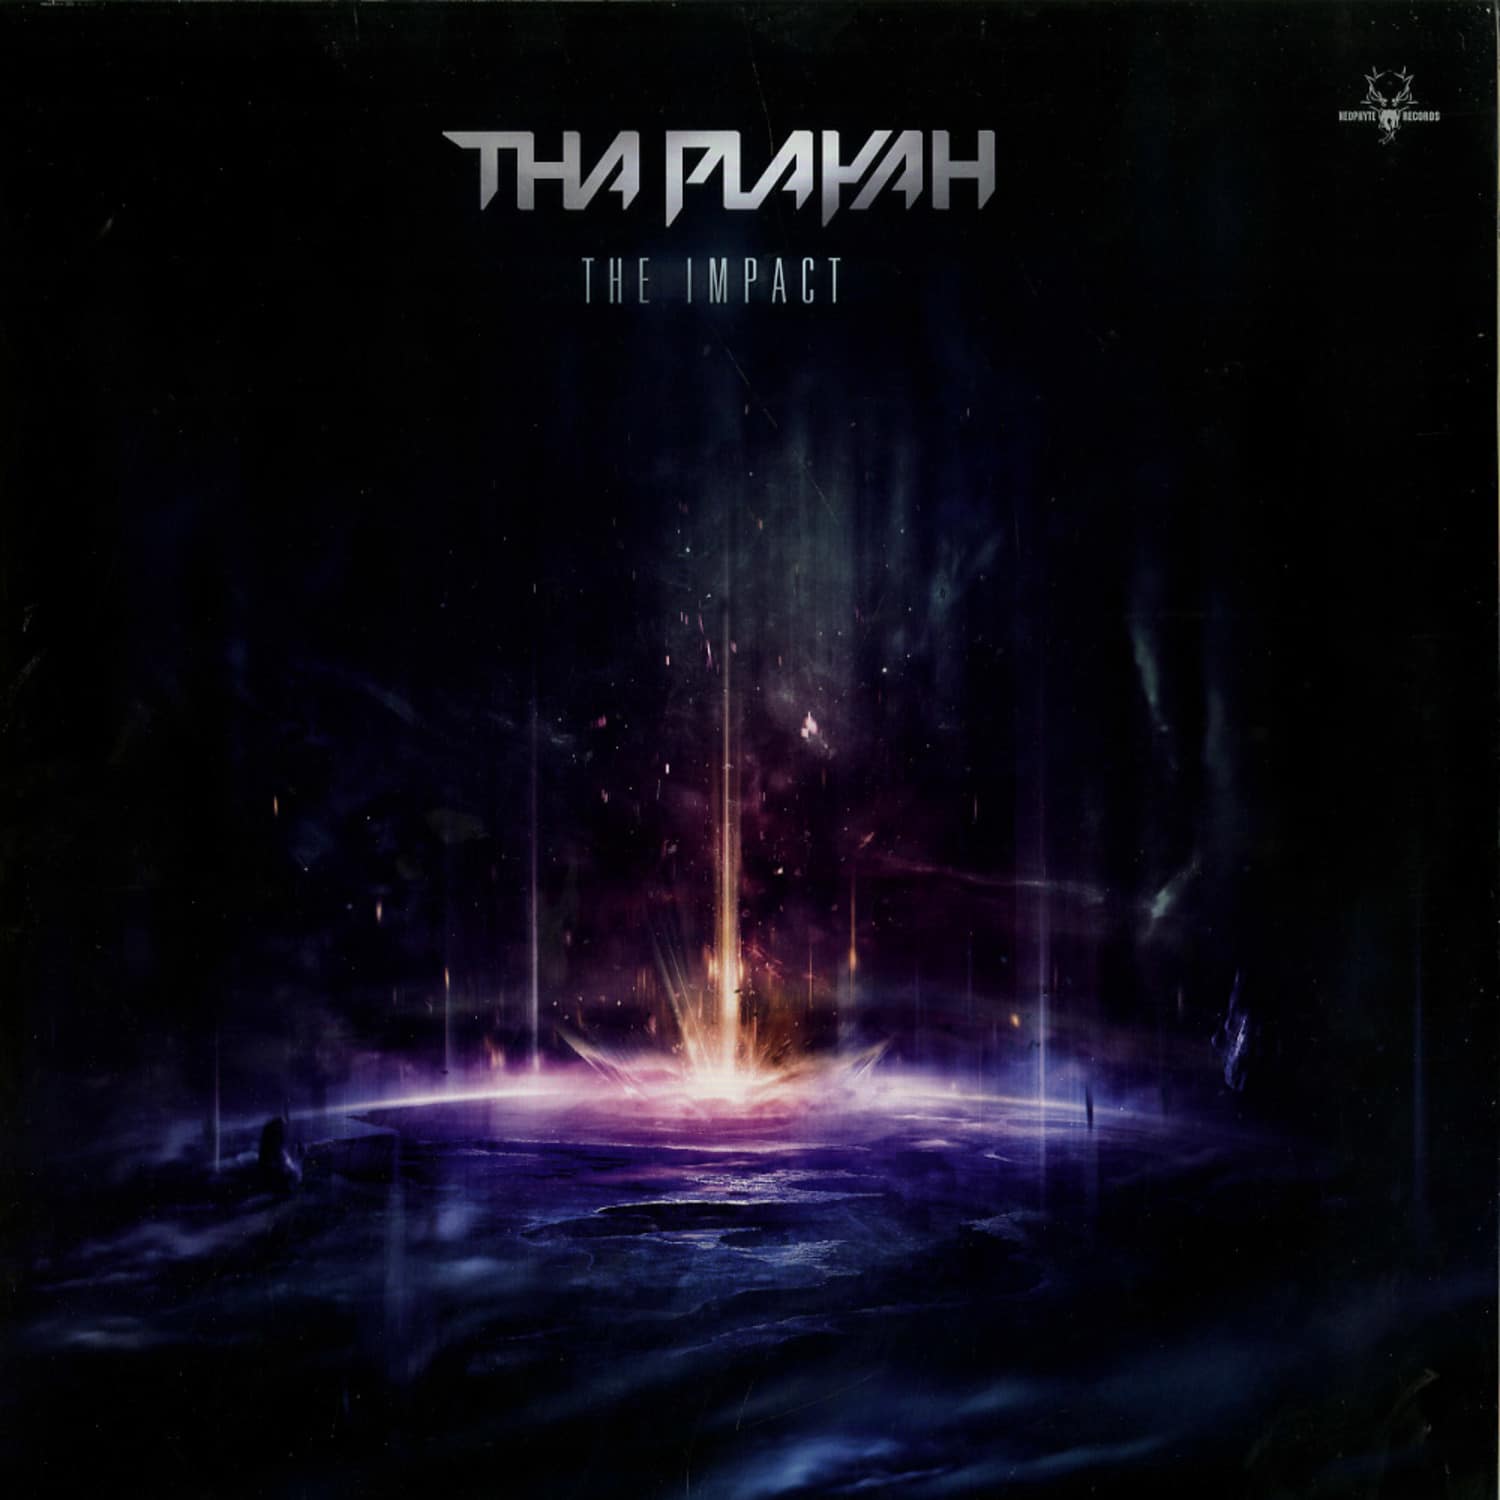 The Playah - THE IMPACT